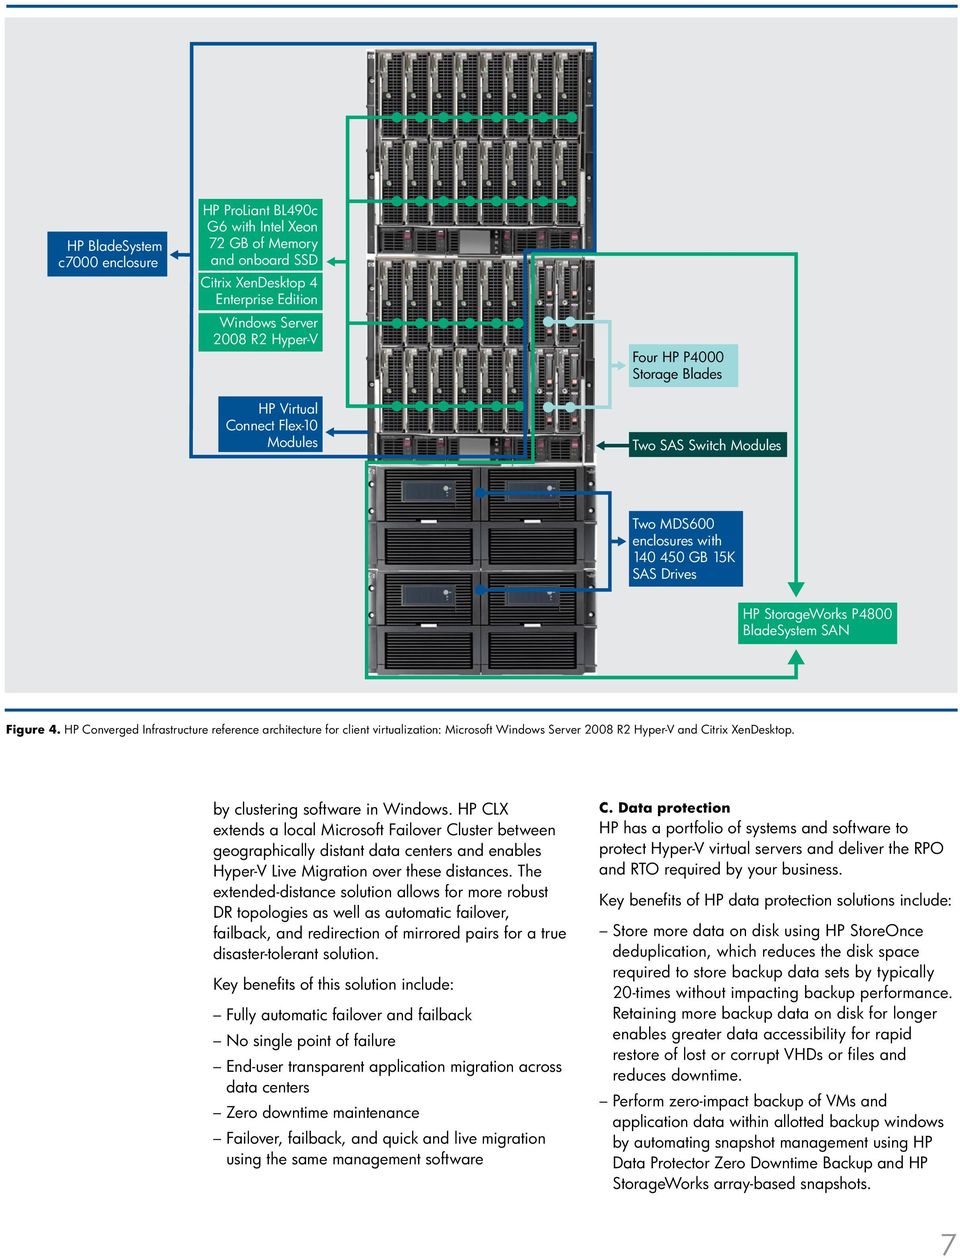 HP Converged Infrastructure reference architecture for client virtualization: Microsoft Windows Server 2008 R2 Hyper-V and Citrix XenDesktop. by clustering software in Windows.